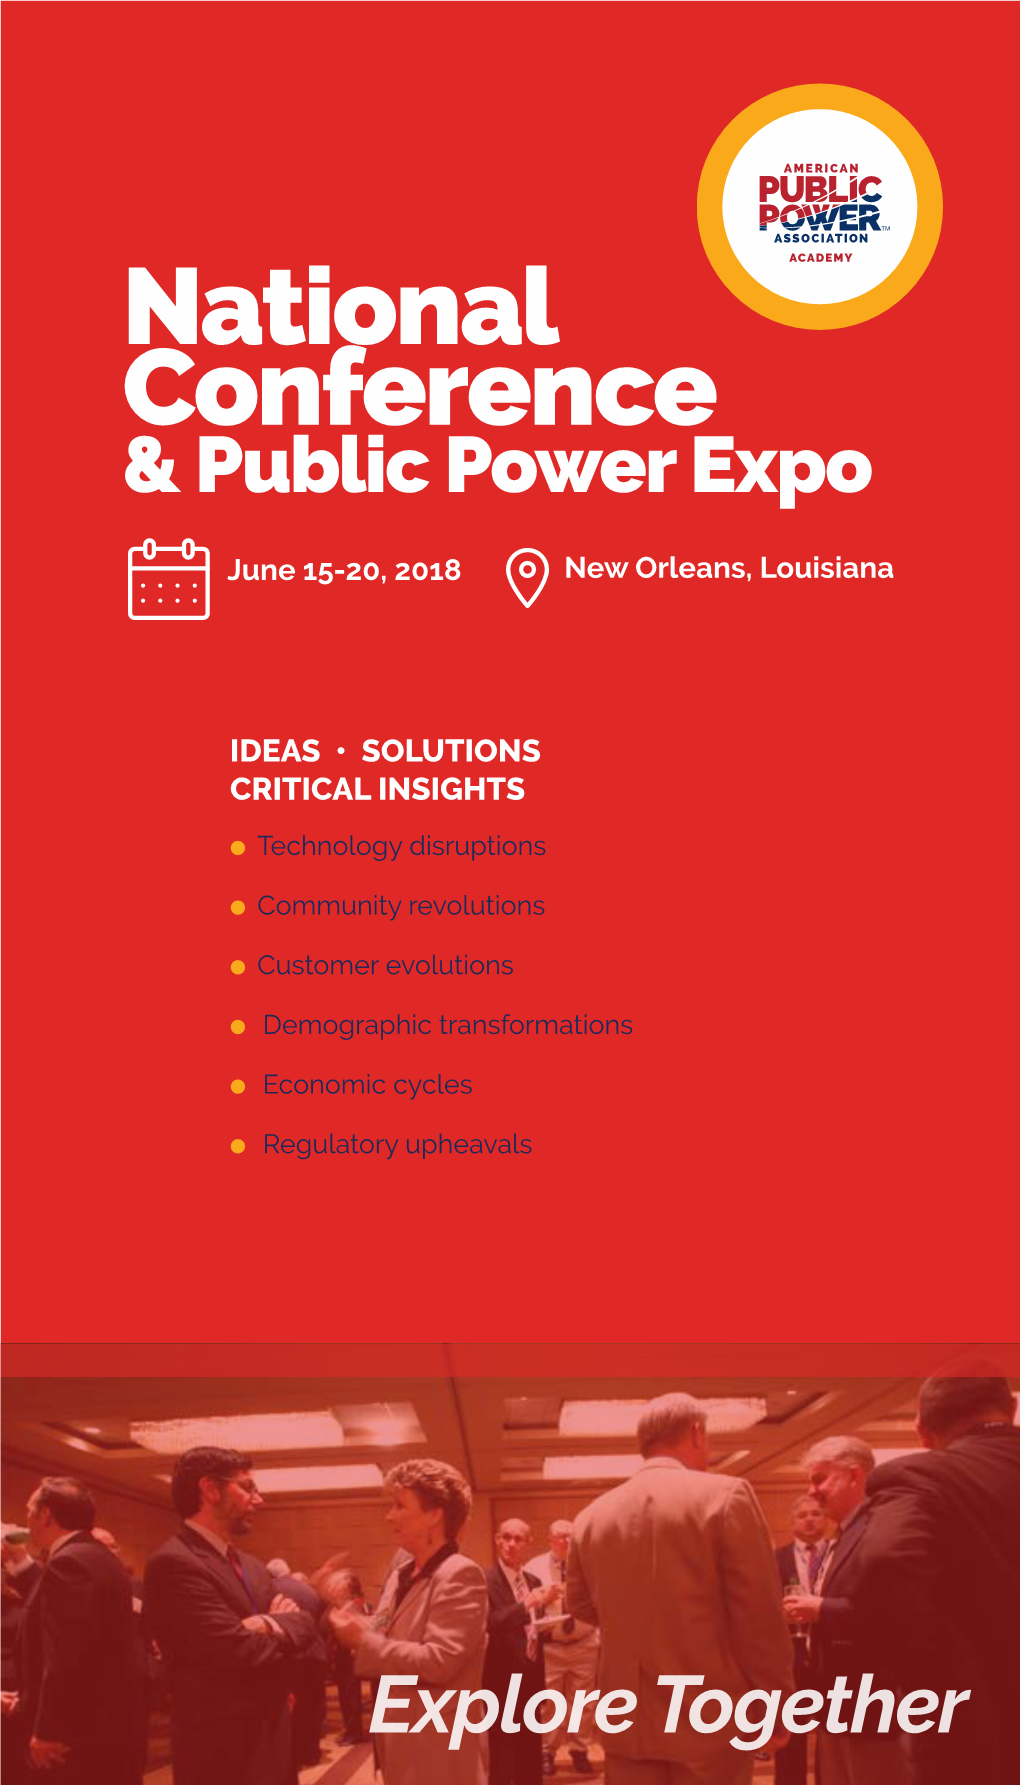 National Conference & Public Power Expo